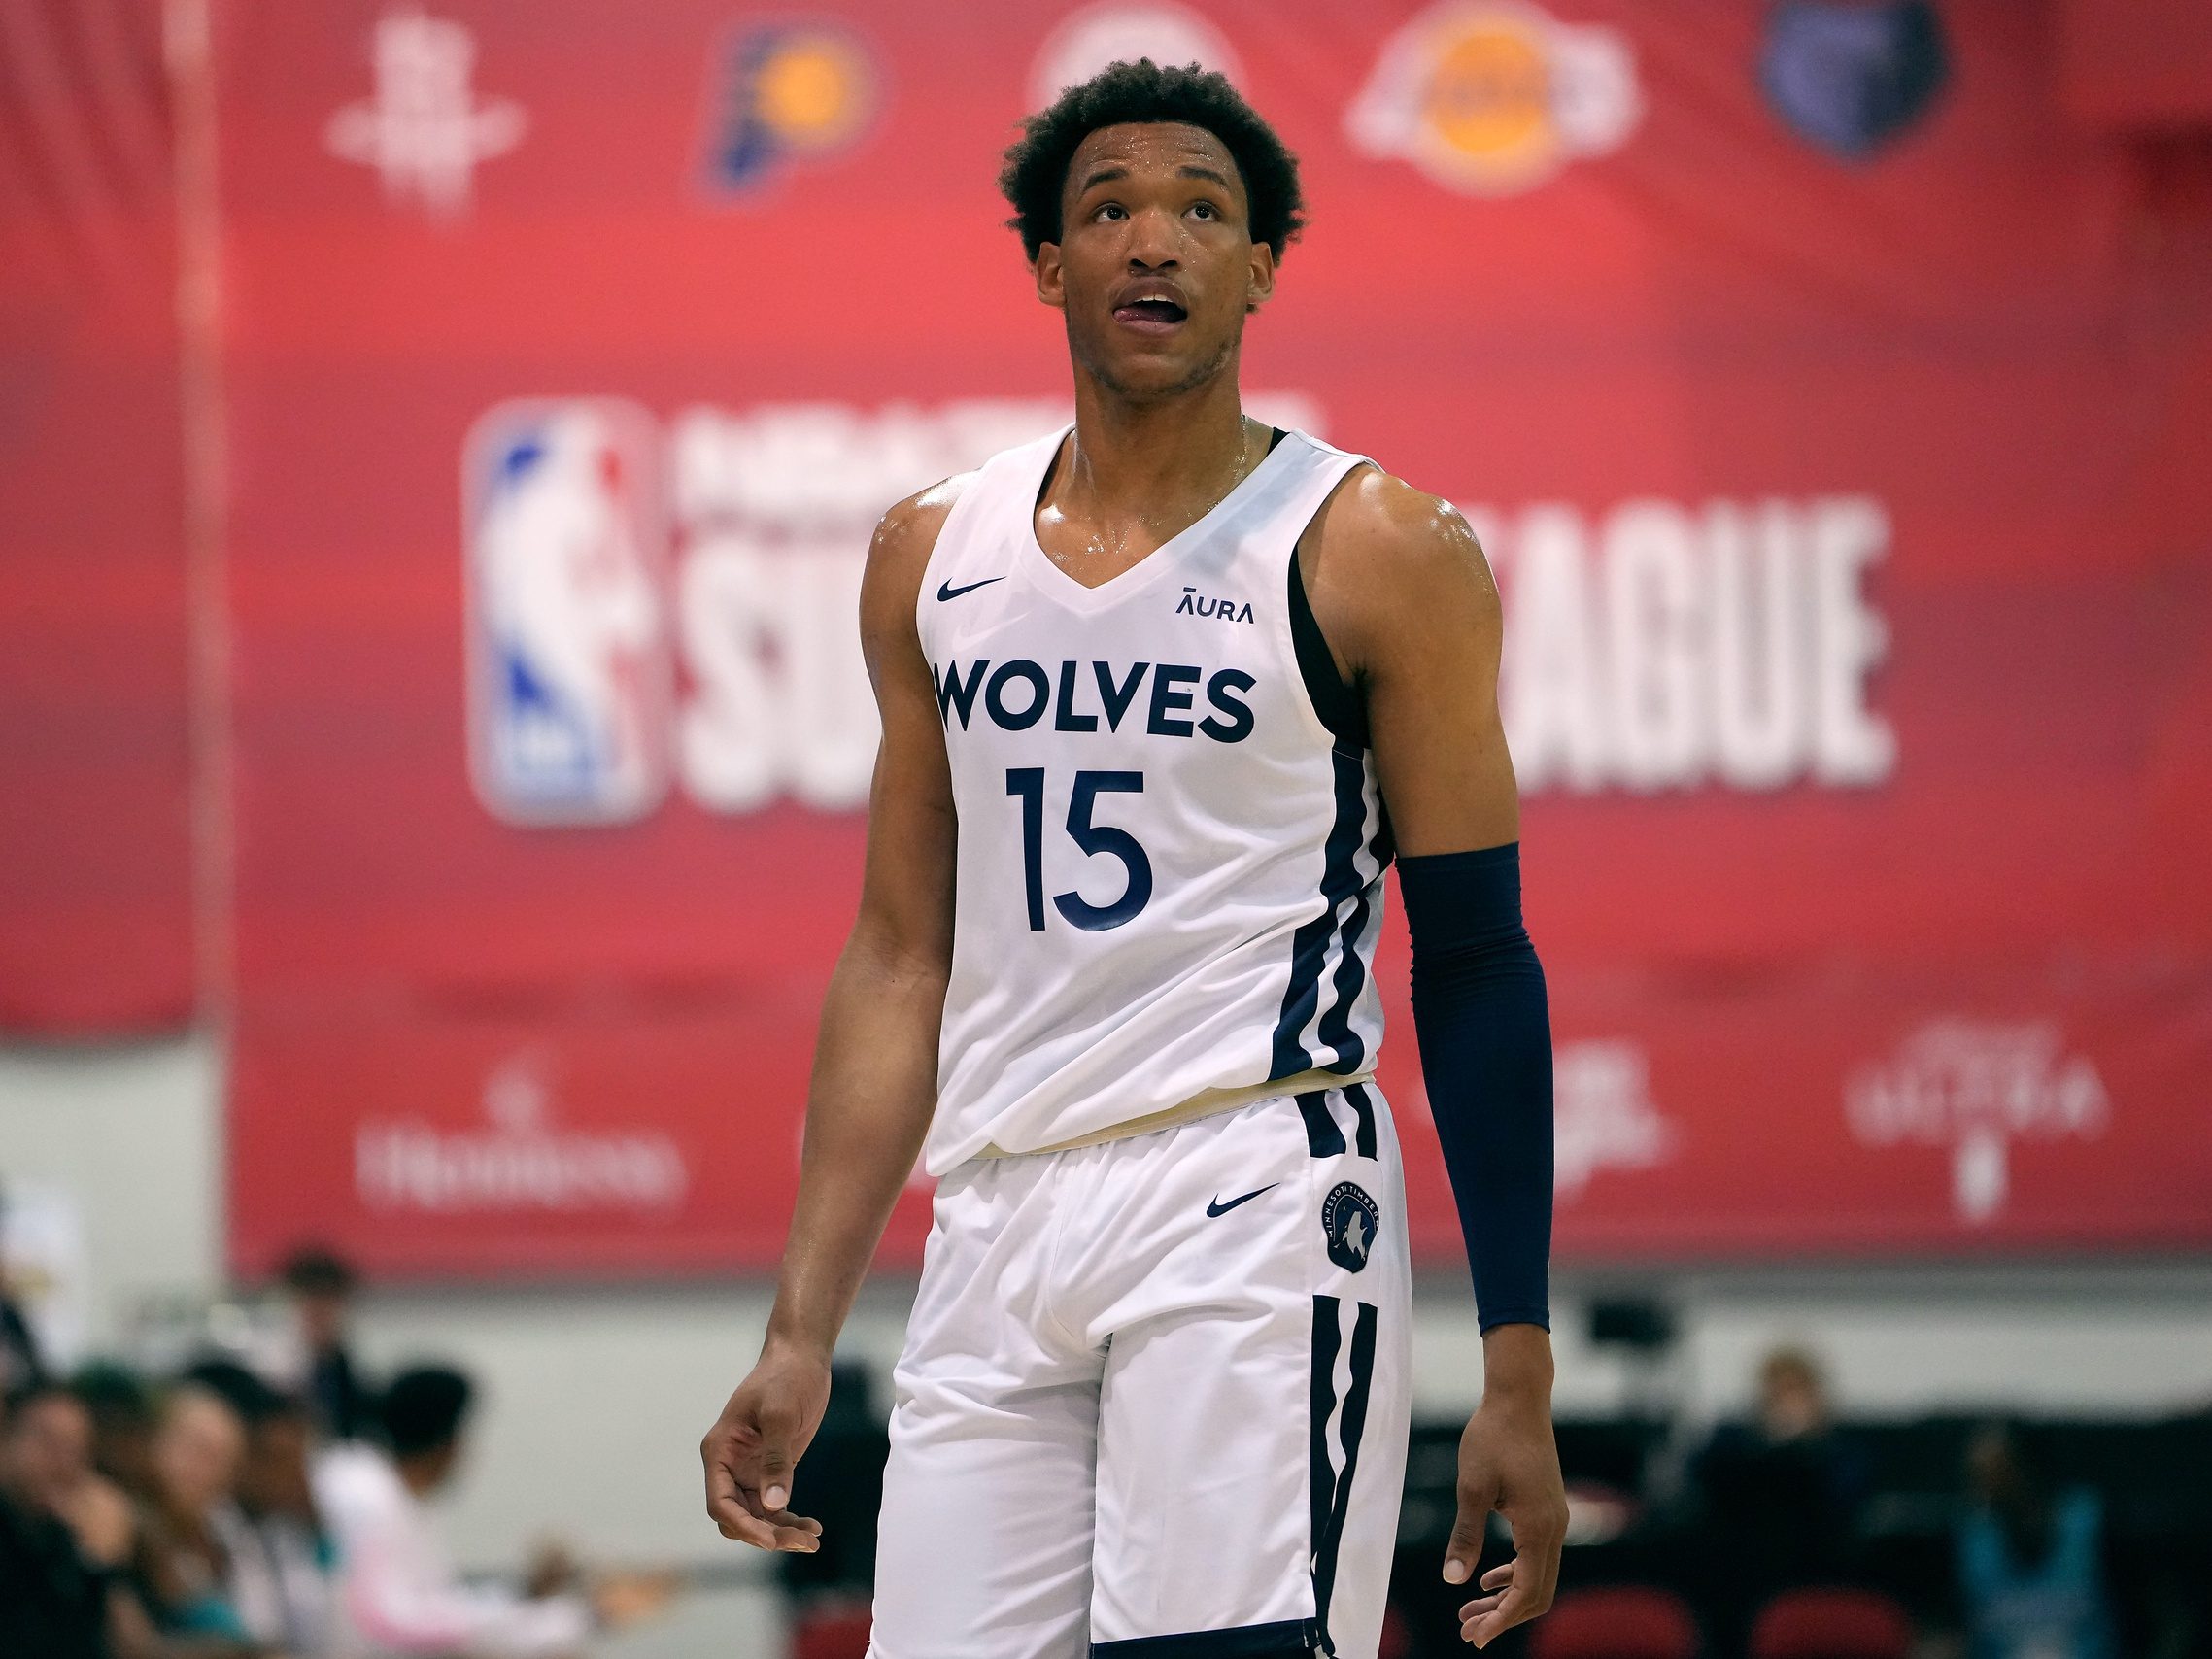 What Can We Realistically Expect From Wendell Moore Jr.? Zone Coverage